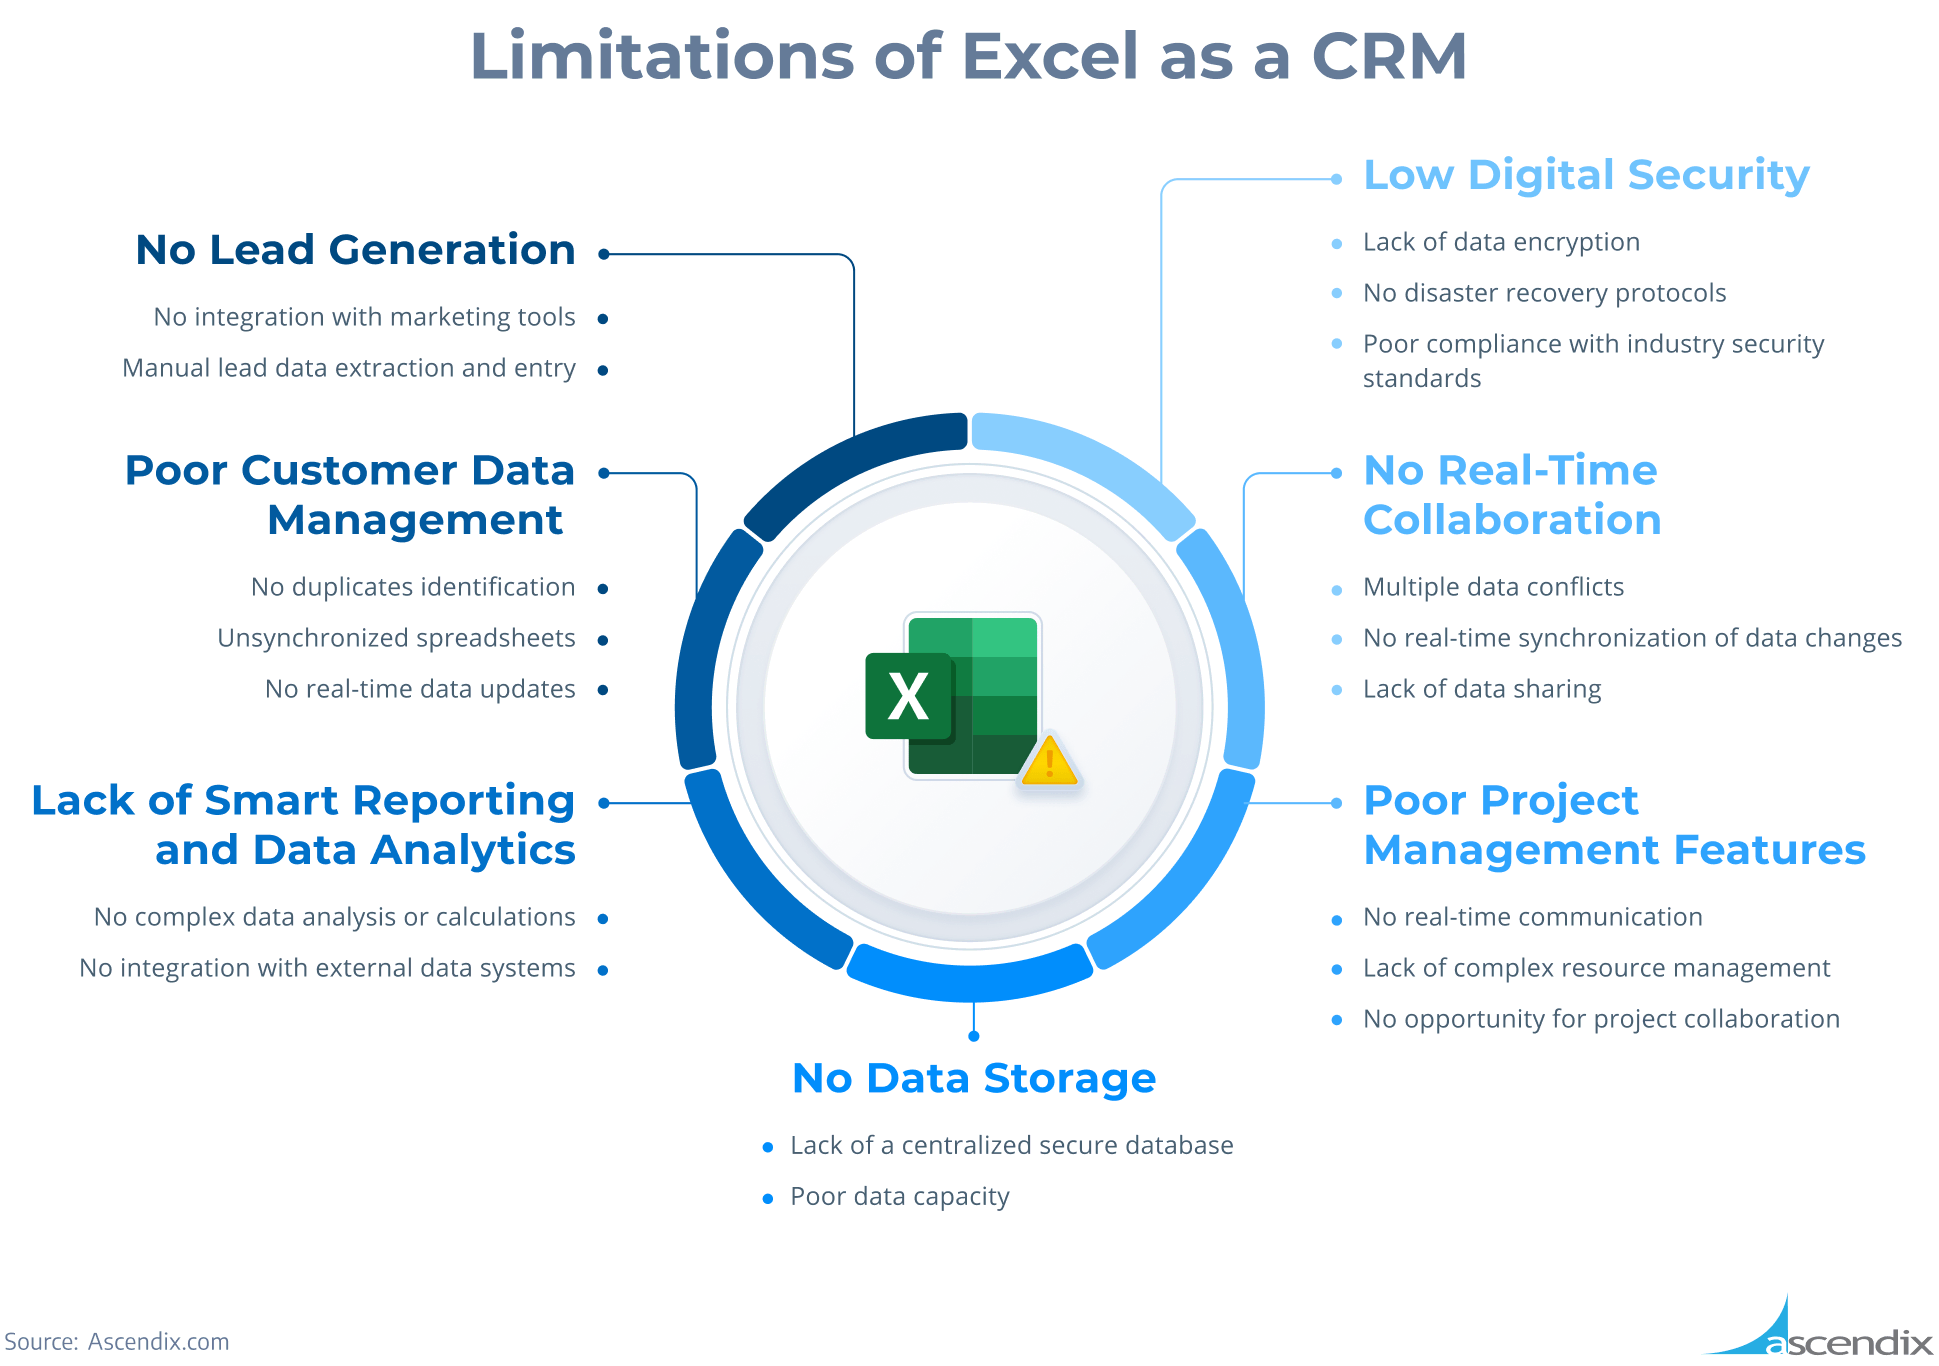 Limitations of Excel as a CRM